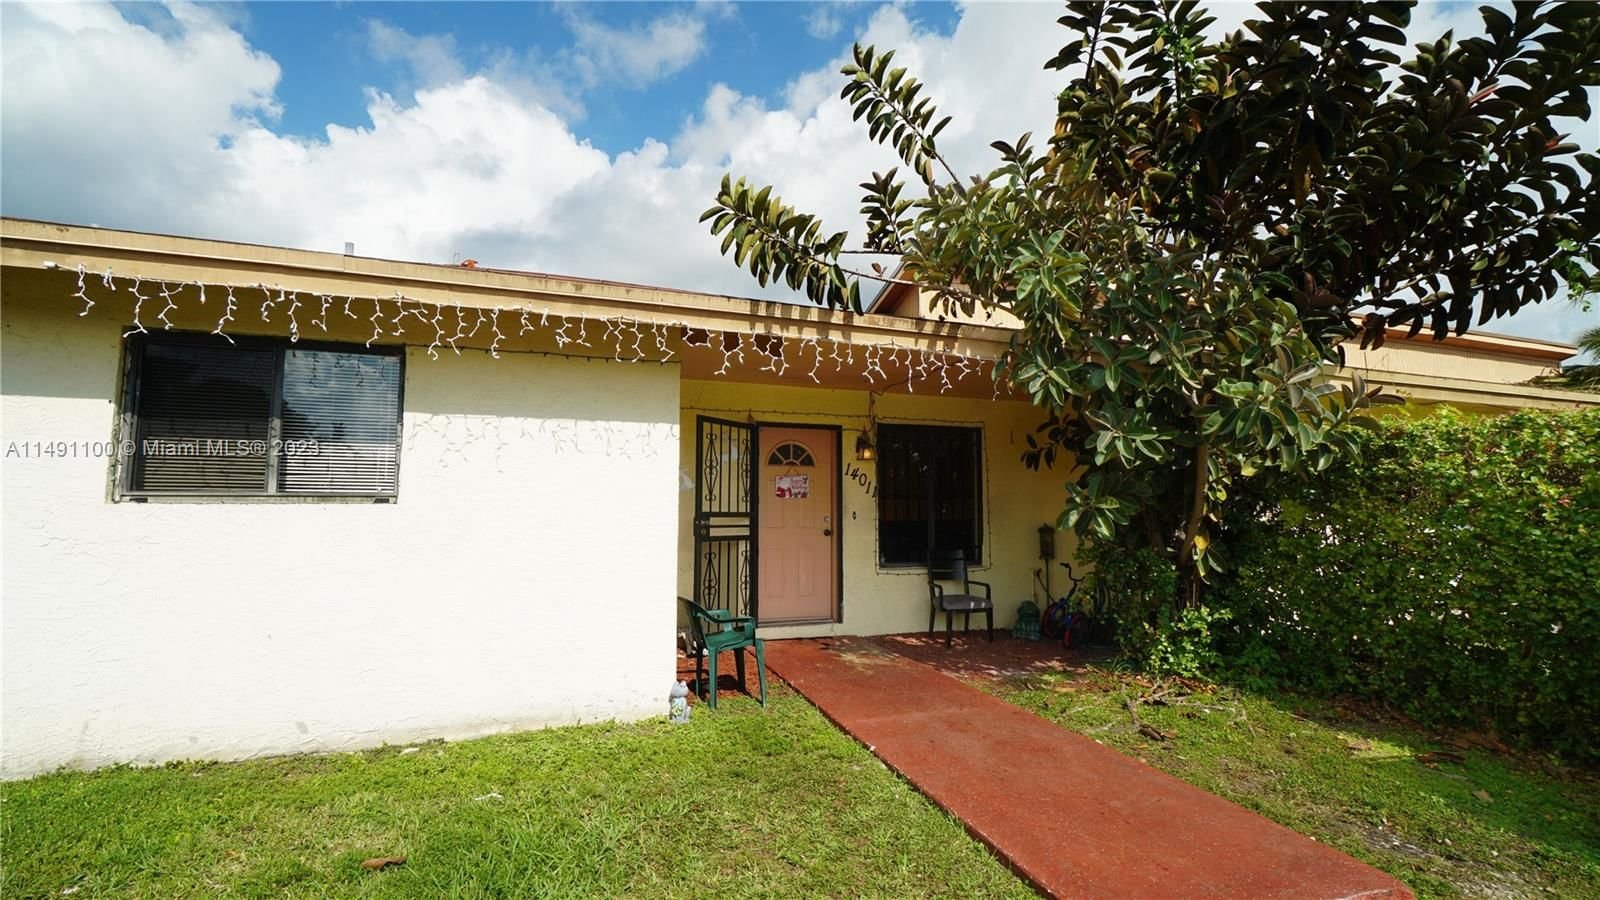 Real estate property located at 14011 281st Ter #14011, Miami-Dade County, WATERSIDE TOWNHOMES SEC 1, Homestead, FL